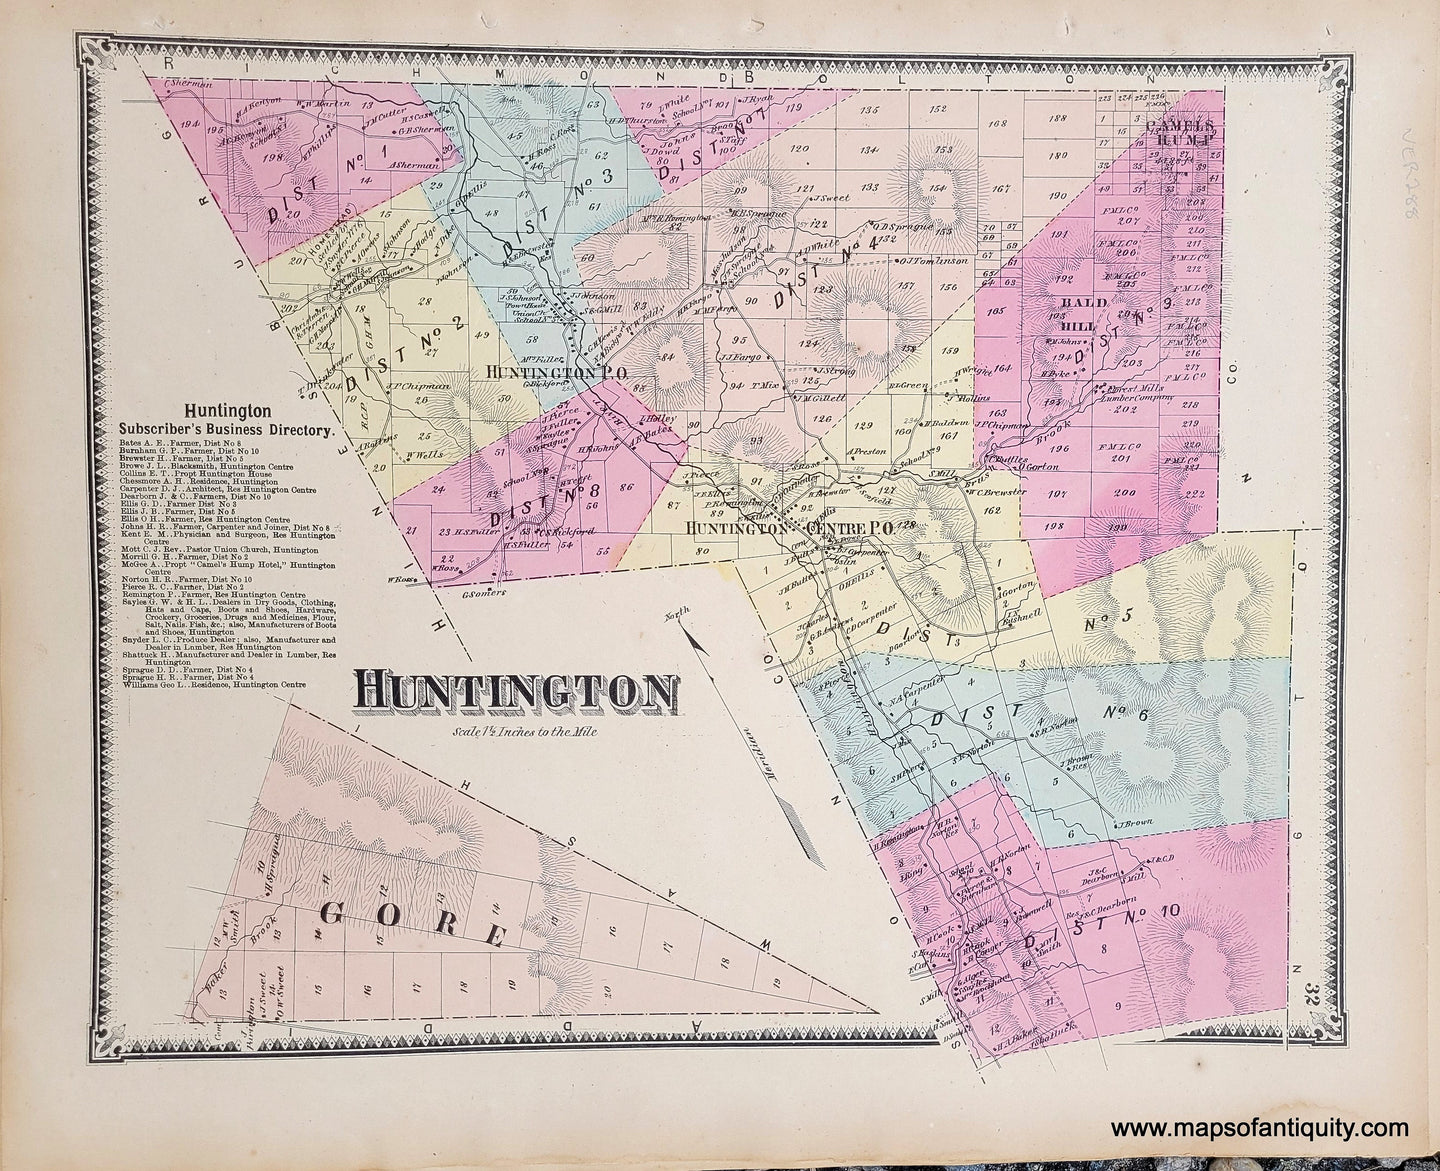 Genuine-Antique-Hand-colored-Map-Huntington-1869-Beers-Ellis-Soule-Maps-Of-Antiquity